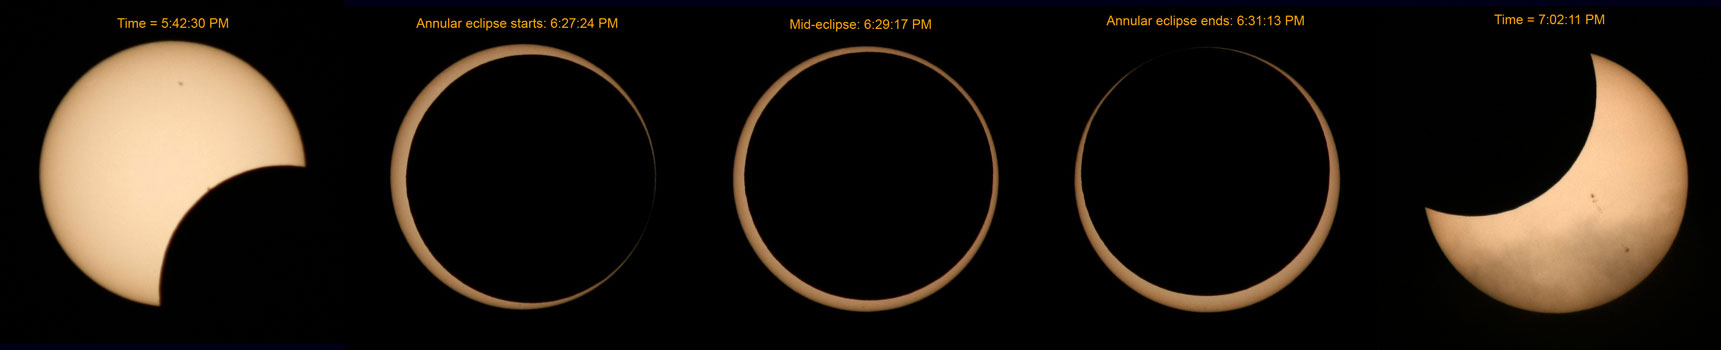 Annular eclipse of May 20, 2012